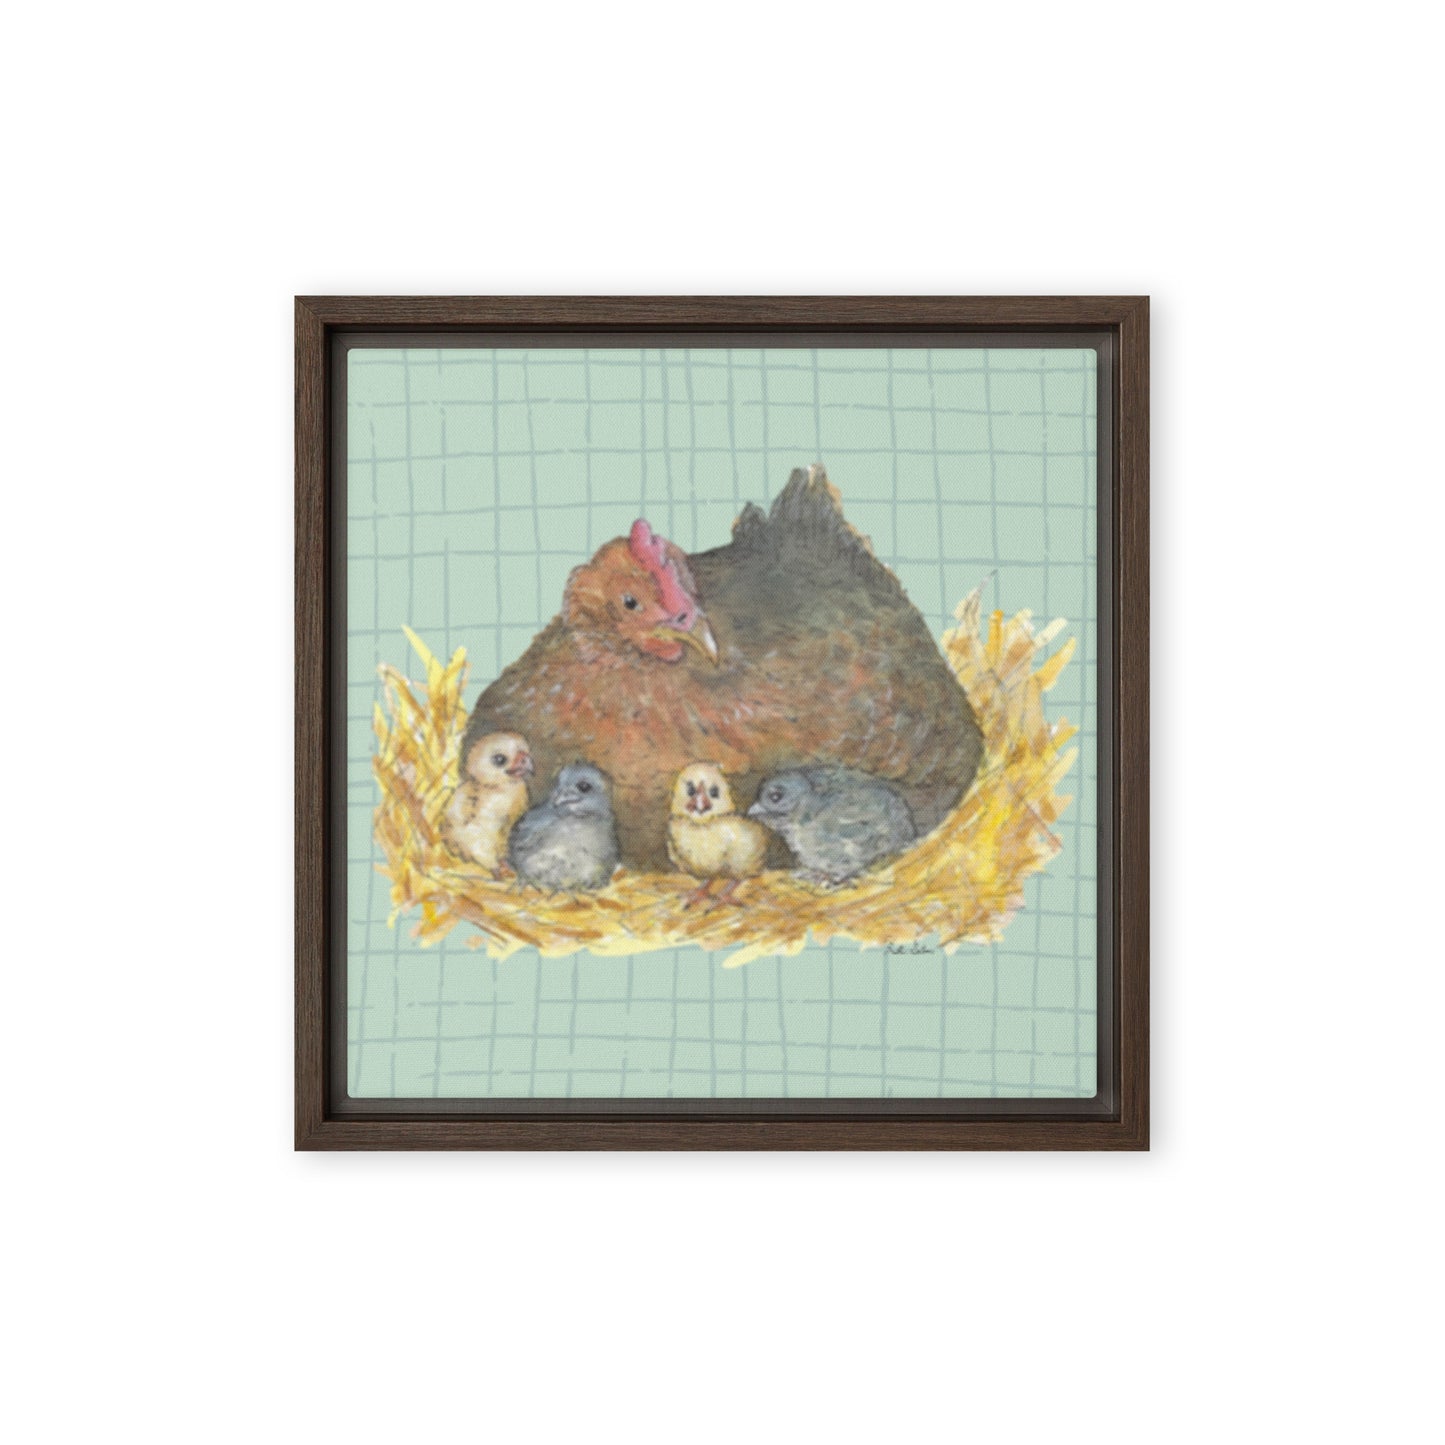 12 by 12 inch Mother Hen Floating Frame Canvas Wall Art. Heather Silver's watercolor painting, Mother Hen, with a green crosshatched background, printed on a stretched canvas and framed with a dark brown pine frame. Hanging hardware included.